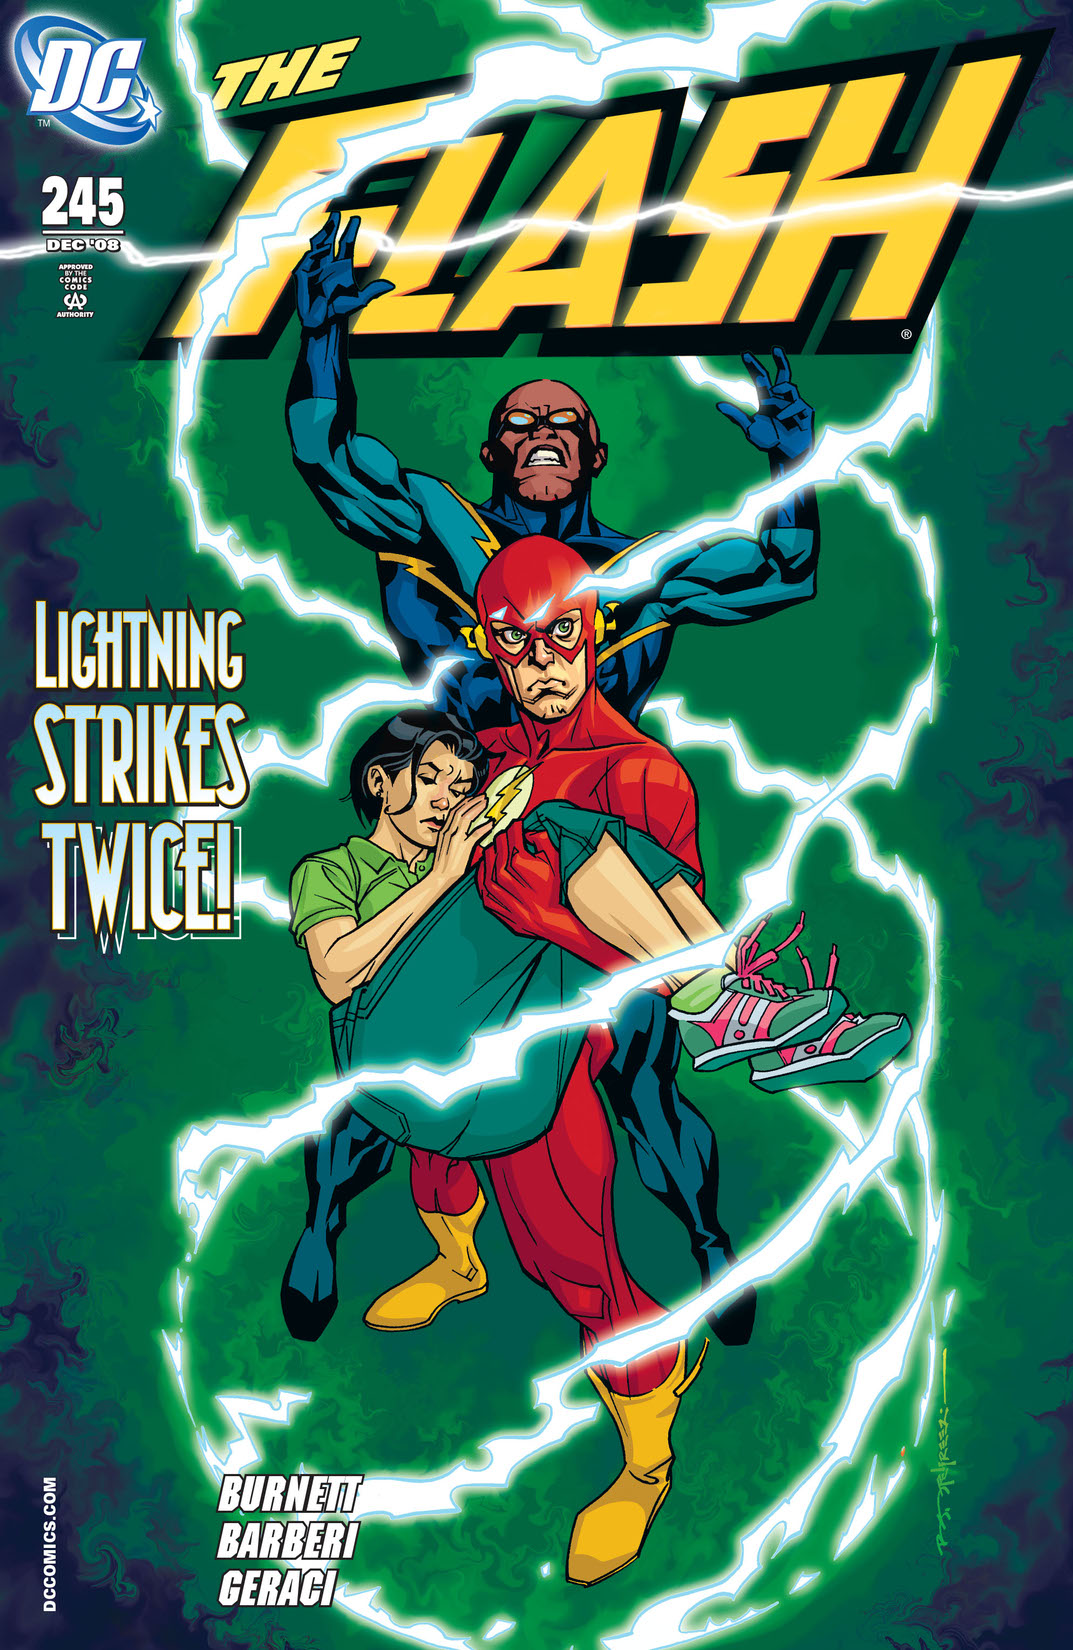 The Flash (1987-) #245 preview images